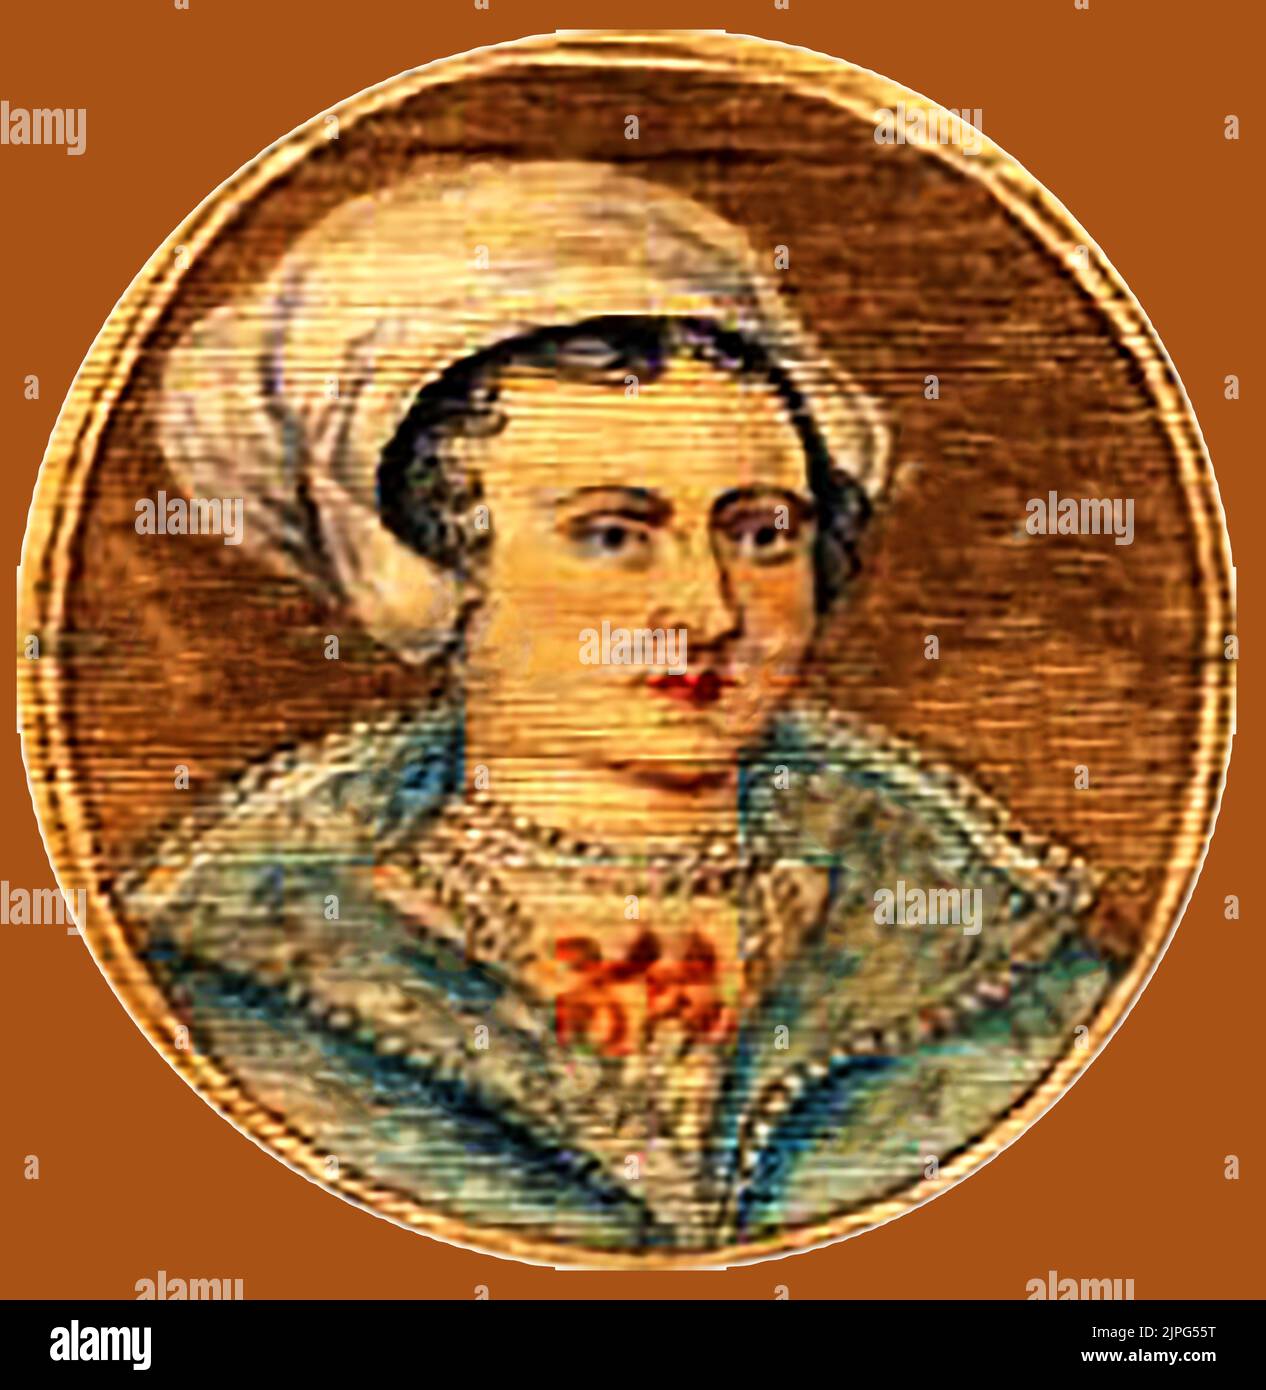 An old coloured portrait of Lady Jane Grey (Queen Jane)   1537 – 12  1554, Queen of England and Ireland. also known after marriage  as Lady Jane Dudley and the Nine Day Queen. She was considered a threat to the British Crown because of her father's opposition to Wyatt's rebellion against Queen Mary's intended marriage to Philip II of Spain. Jane and her husband  Lord Guilford Dudley were executed after only 9 days as Queen on 12 February 1554 on what is believed by many to have been a purely political 'jumped up' charge. No headstone was placed on their graves. Stock Photo